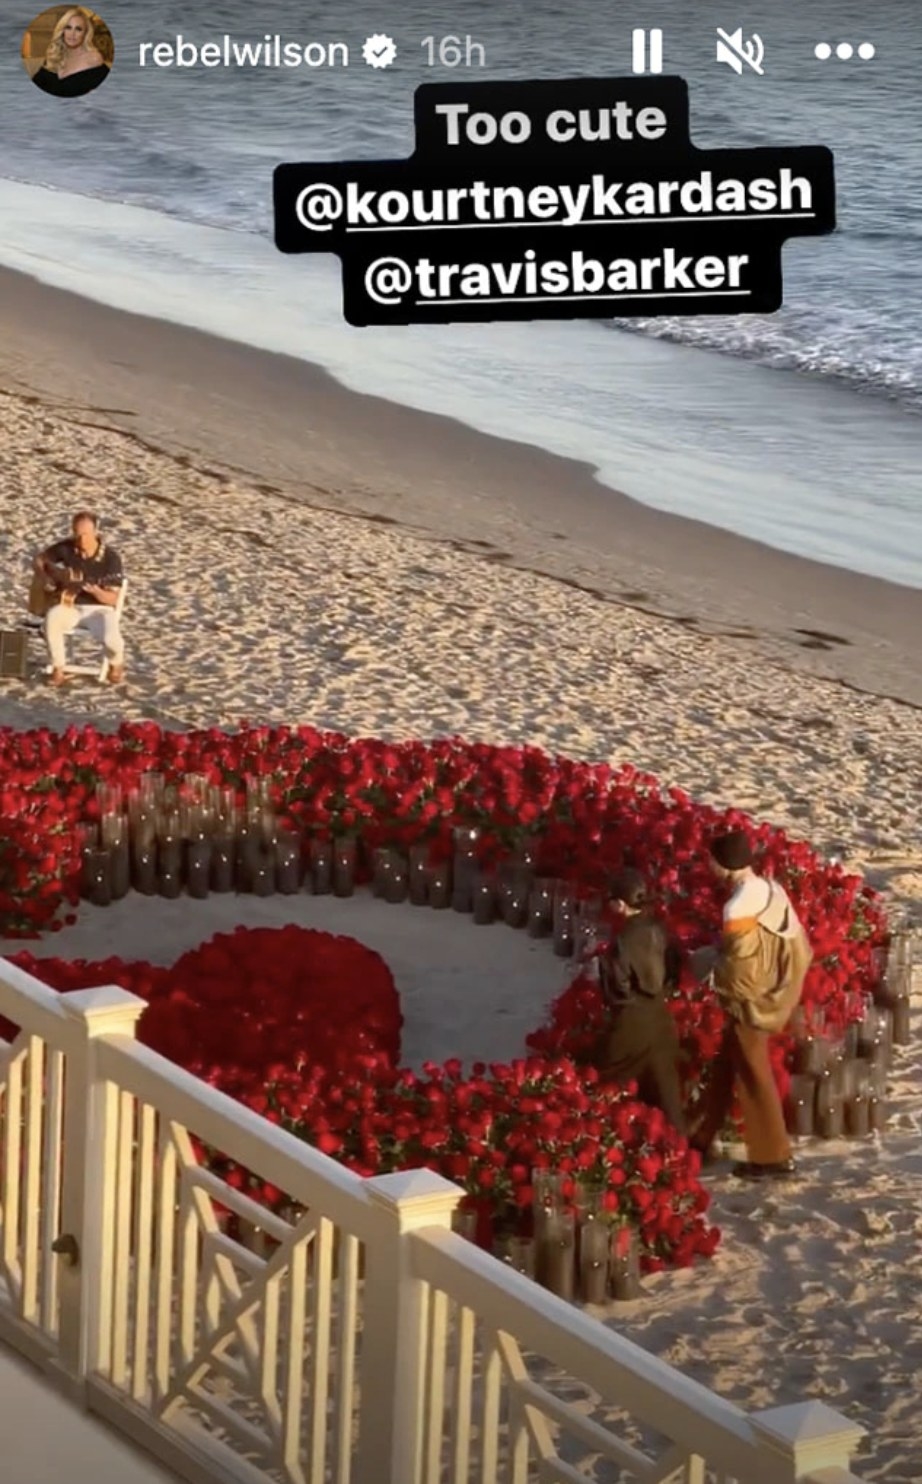 Kourt and Travis can be seen walking towards a heart made of roses and candles on the beach